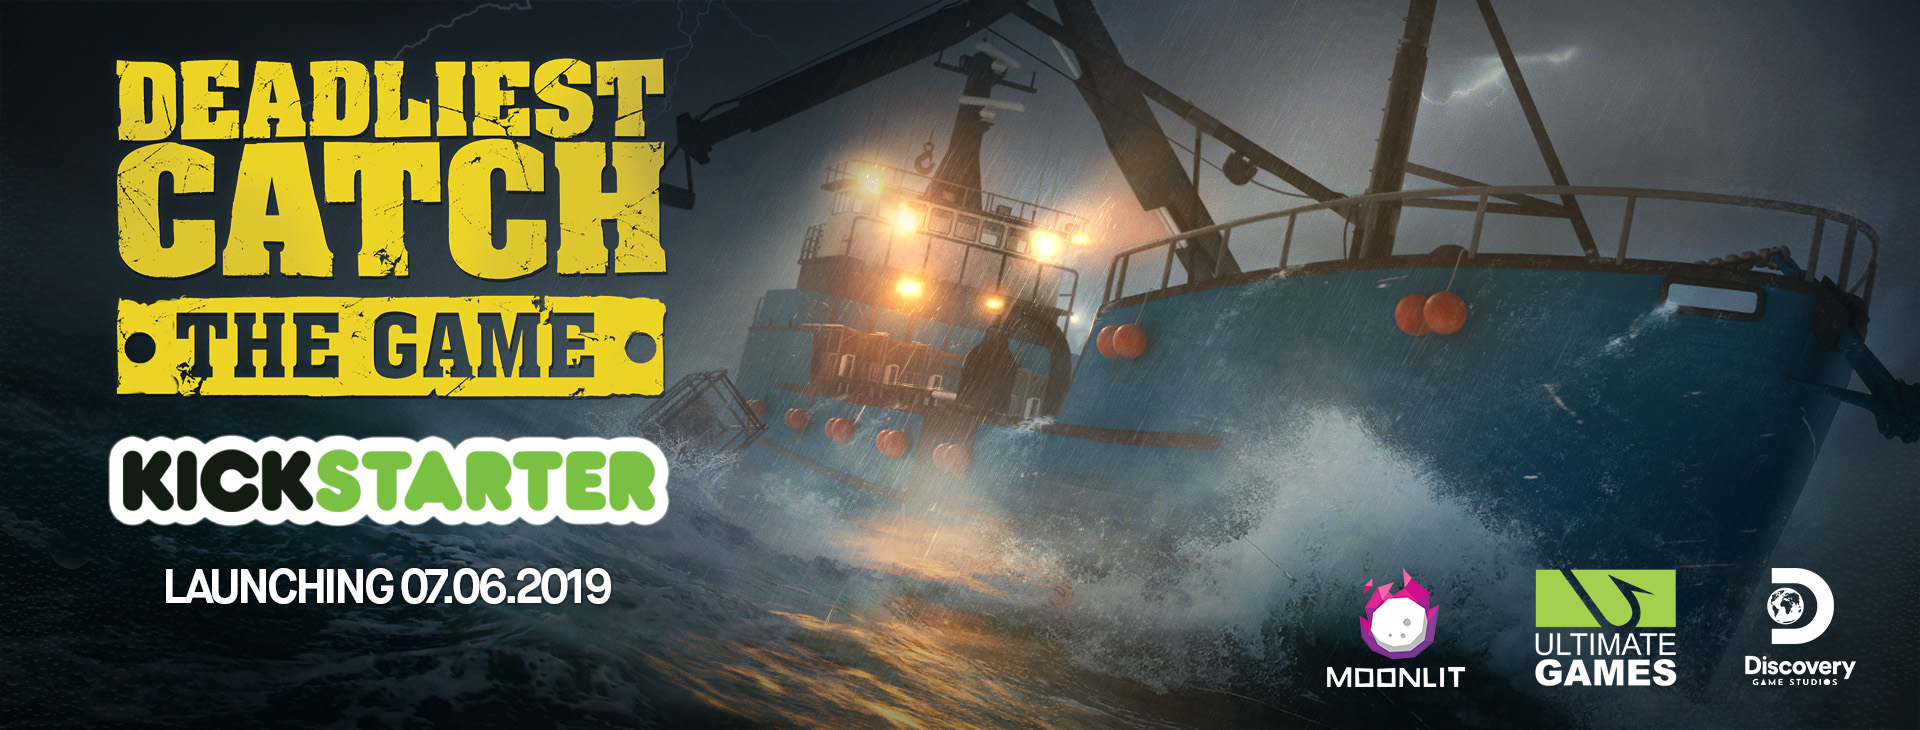 deadliest catch the game 2019 ps4